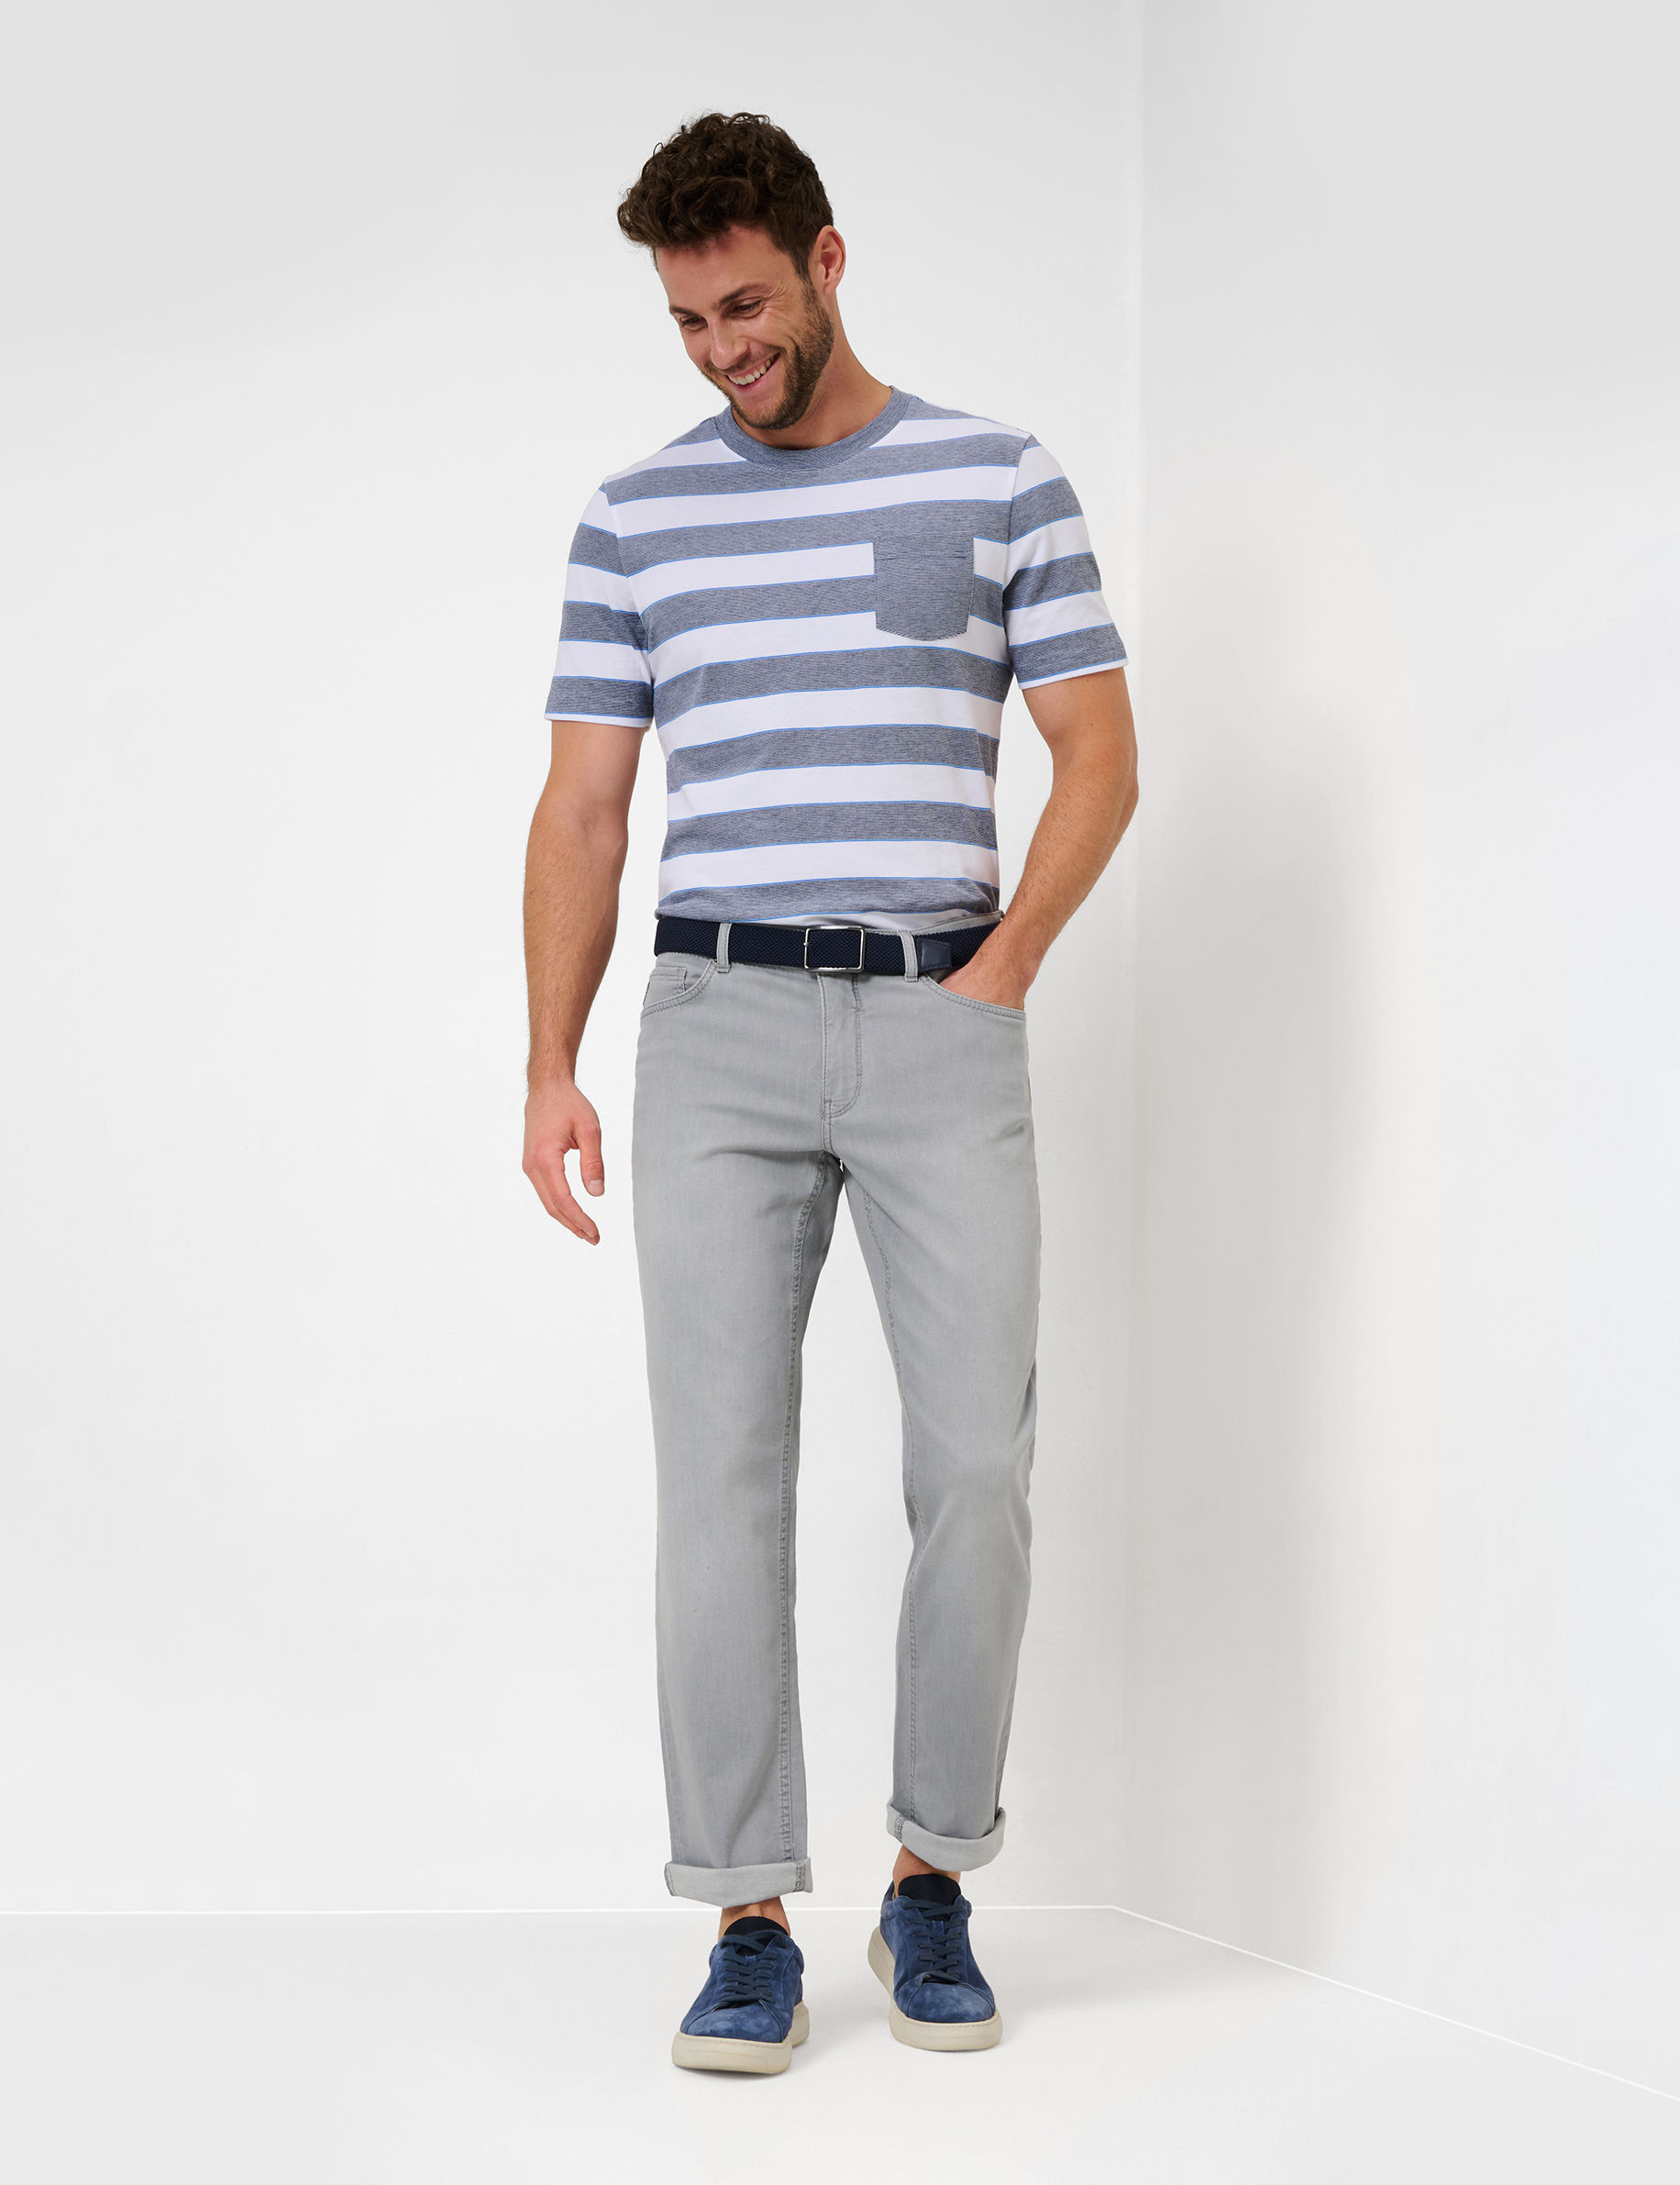 Men Style COOPER GREY USED Regular Fit Model Outfit